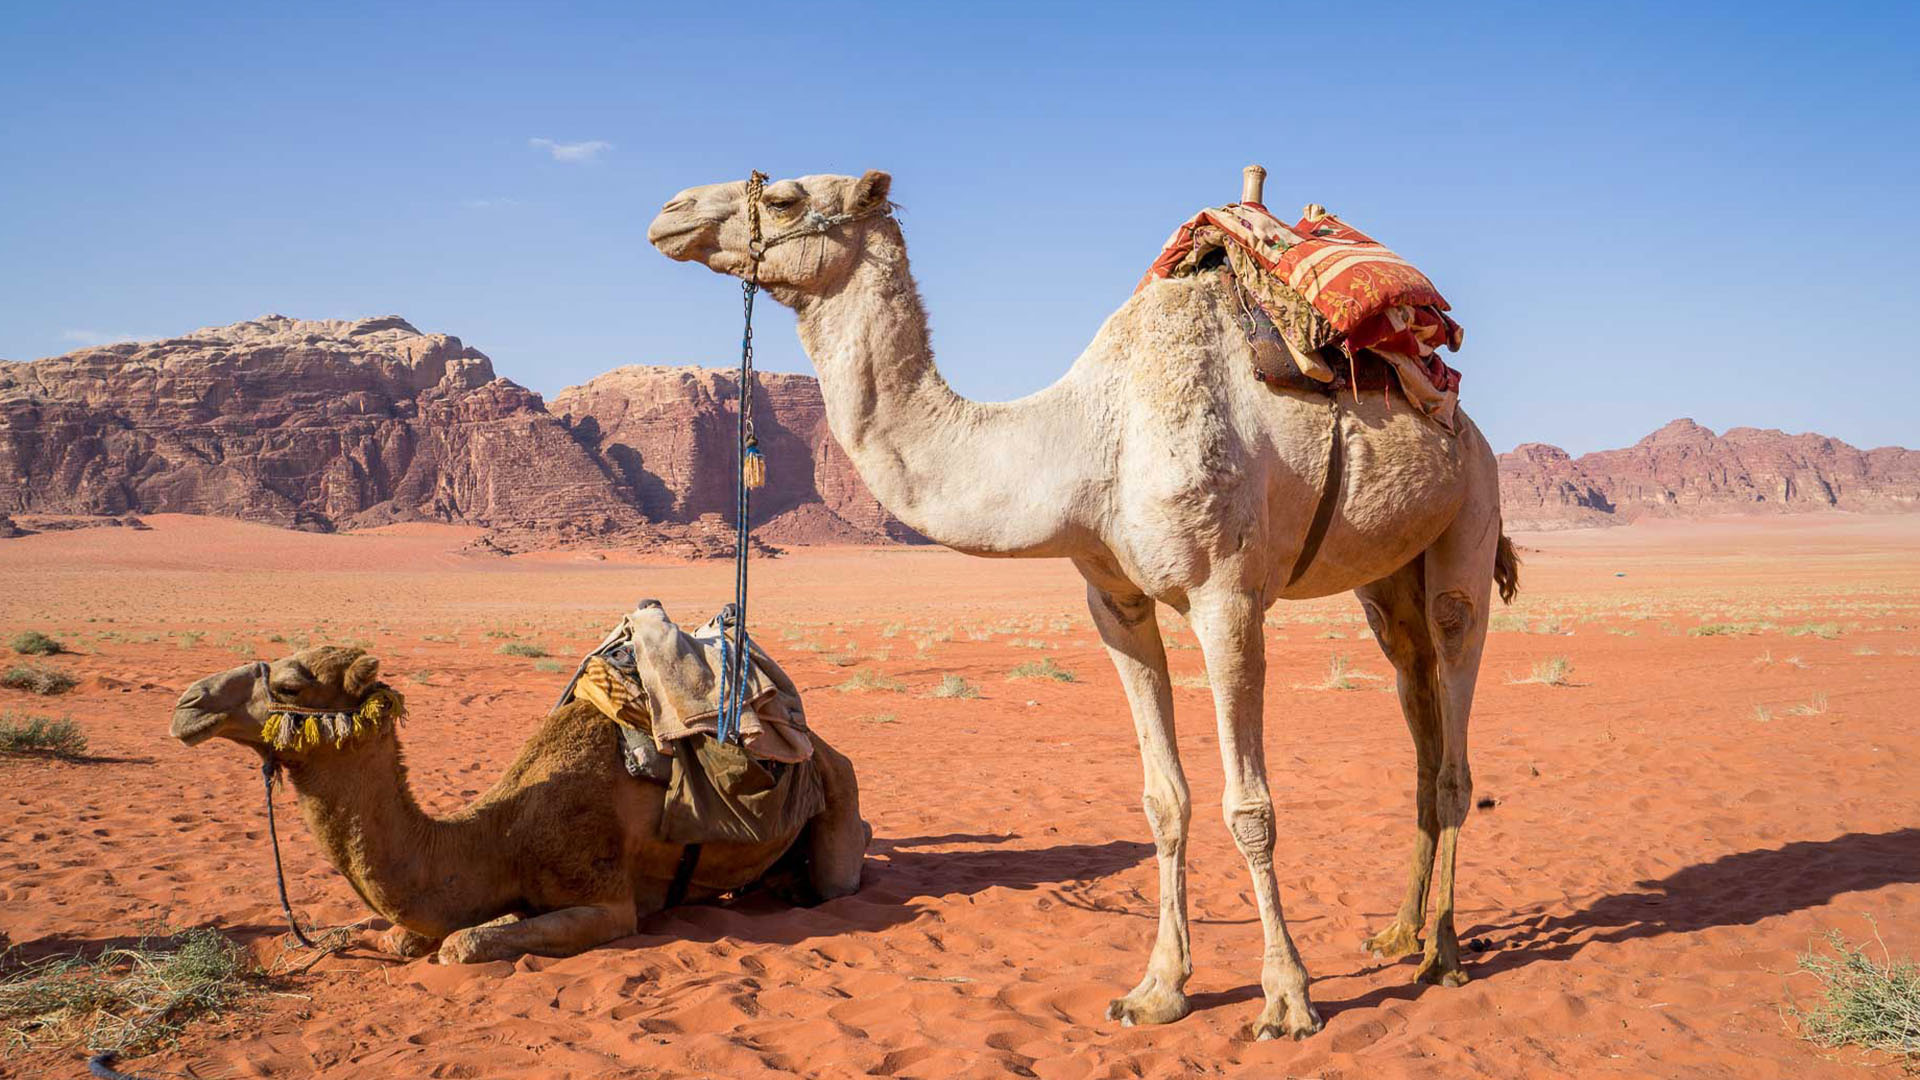 Jordan Desert: In this panoramic photograph, the captivating Wadi Rum serves as the backdrop, while two camels take center stage, gracefully positioned against the majestic mountains.